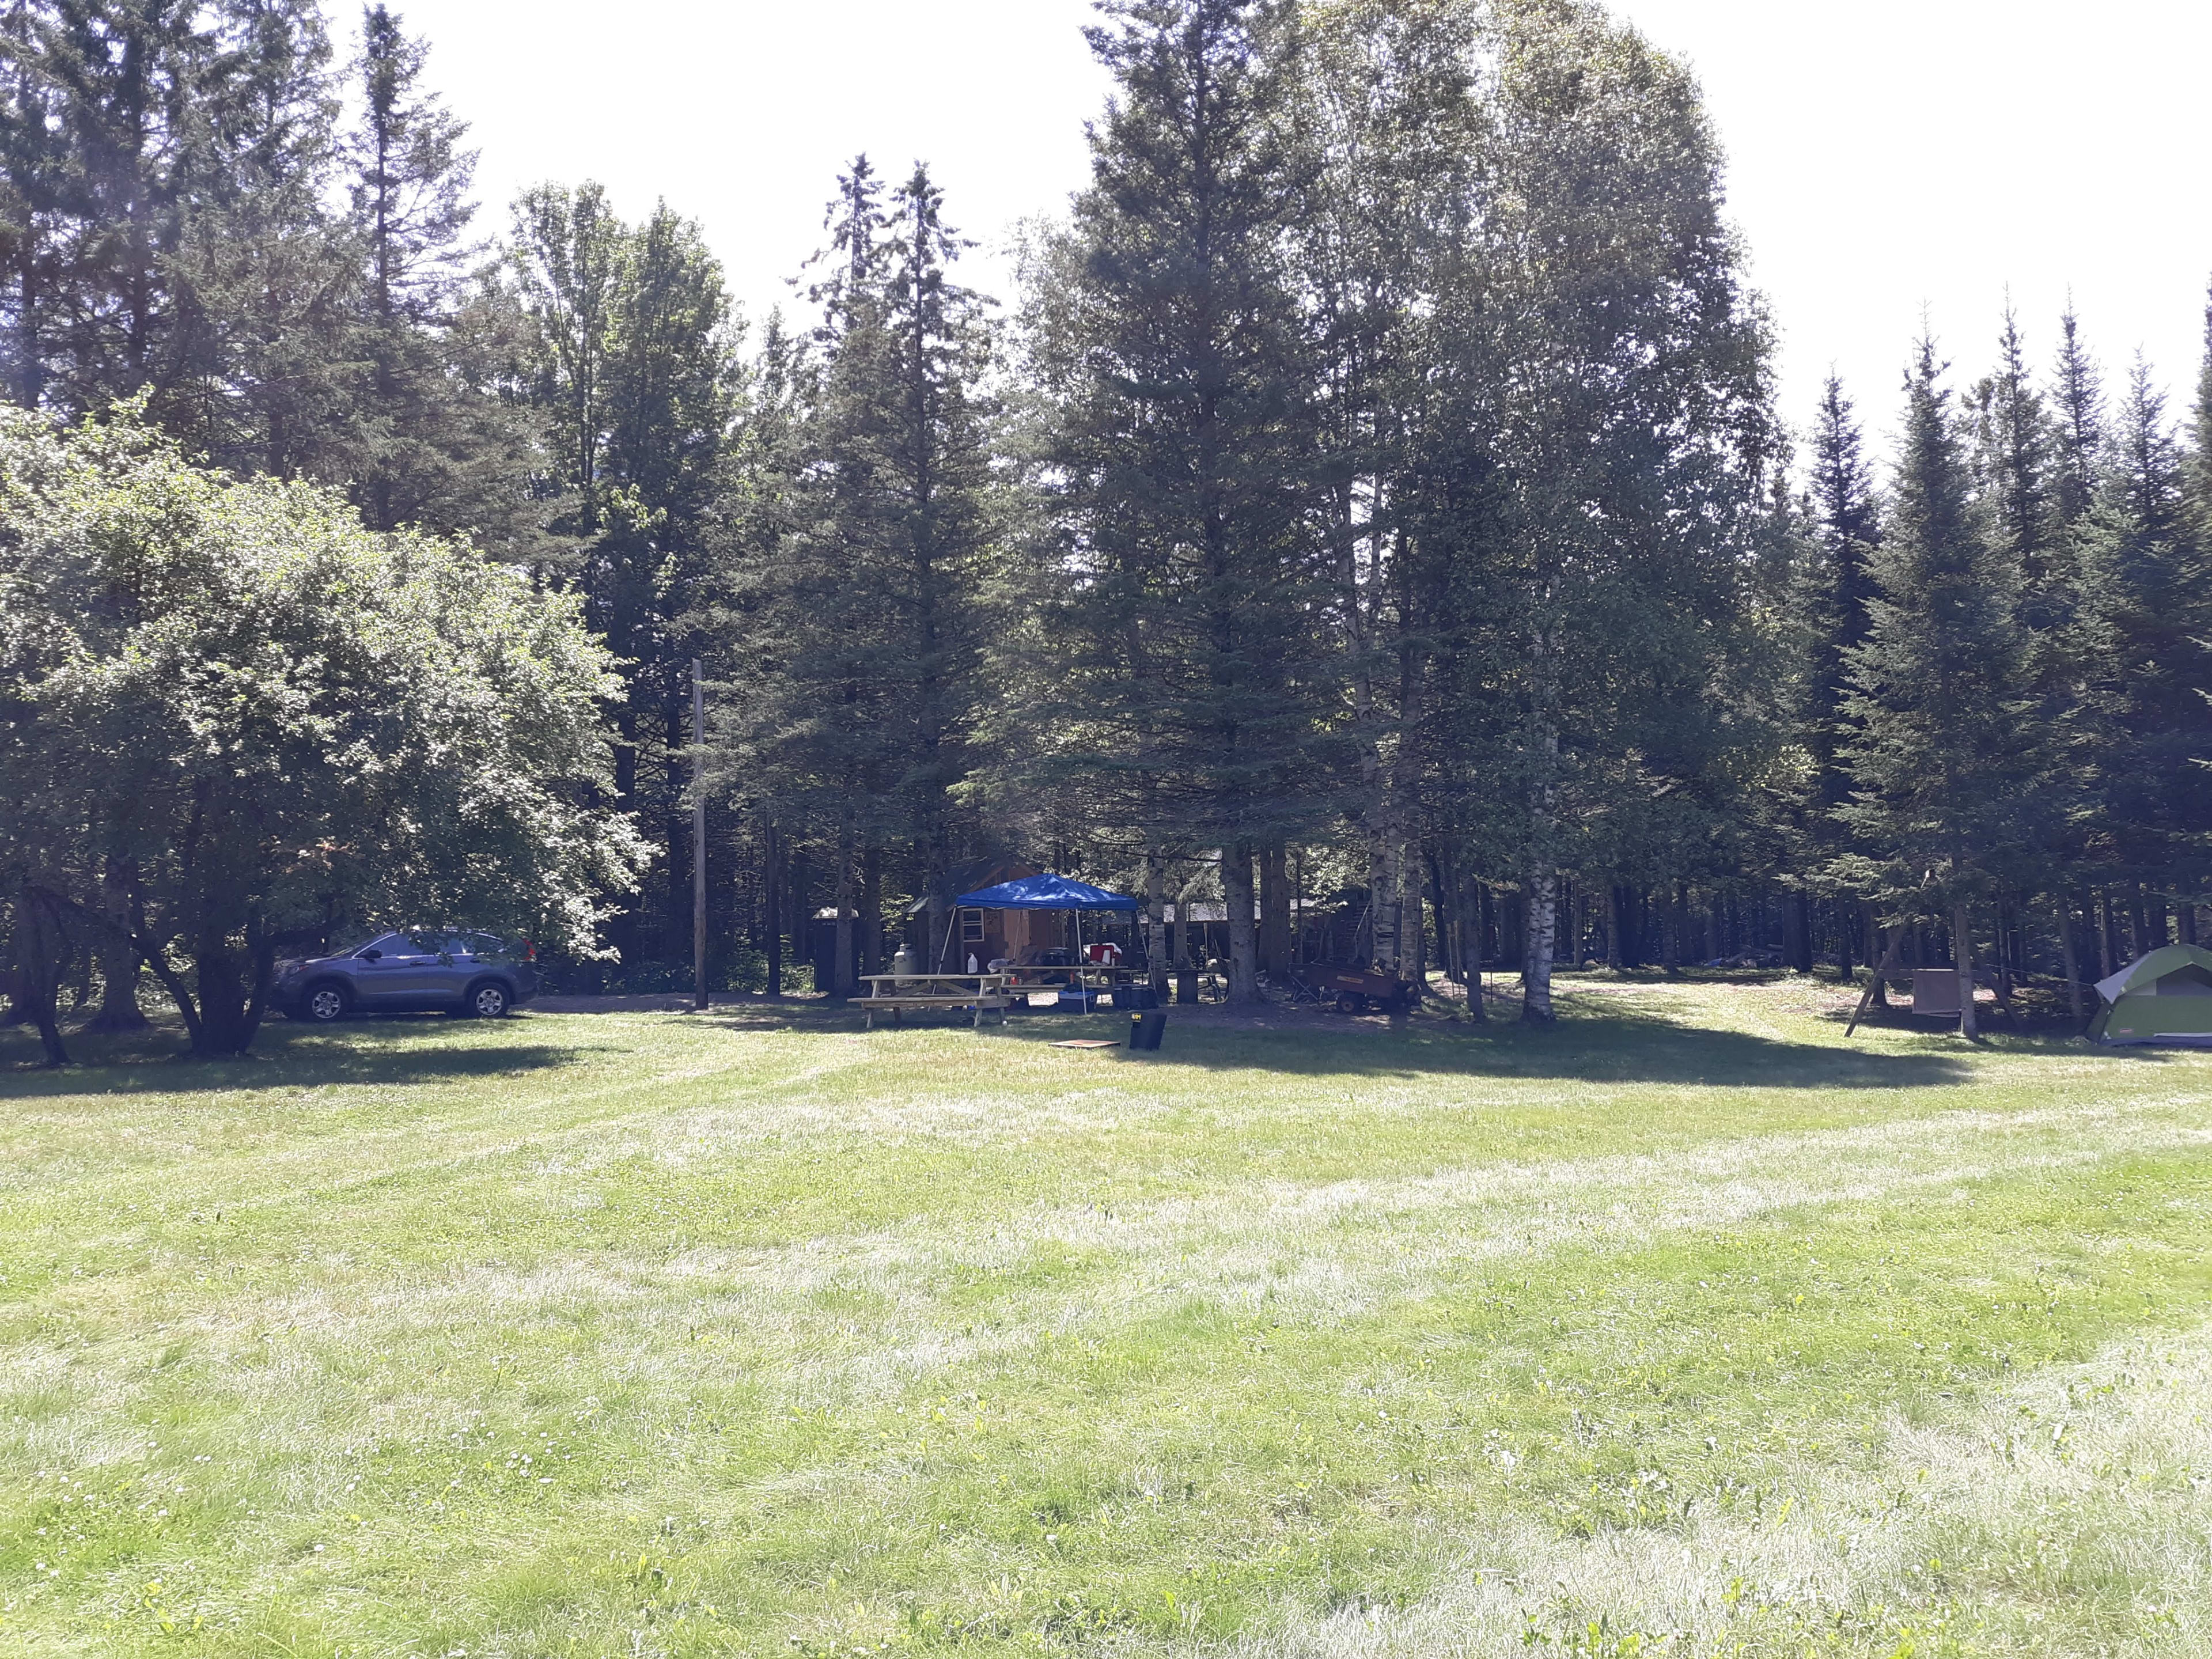 In-Tents camping group site